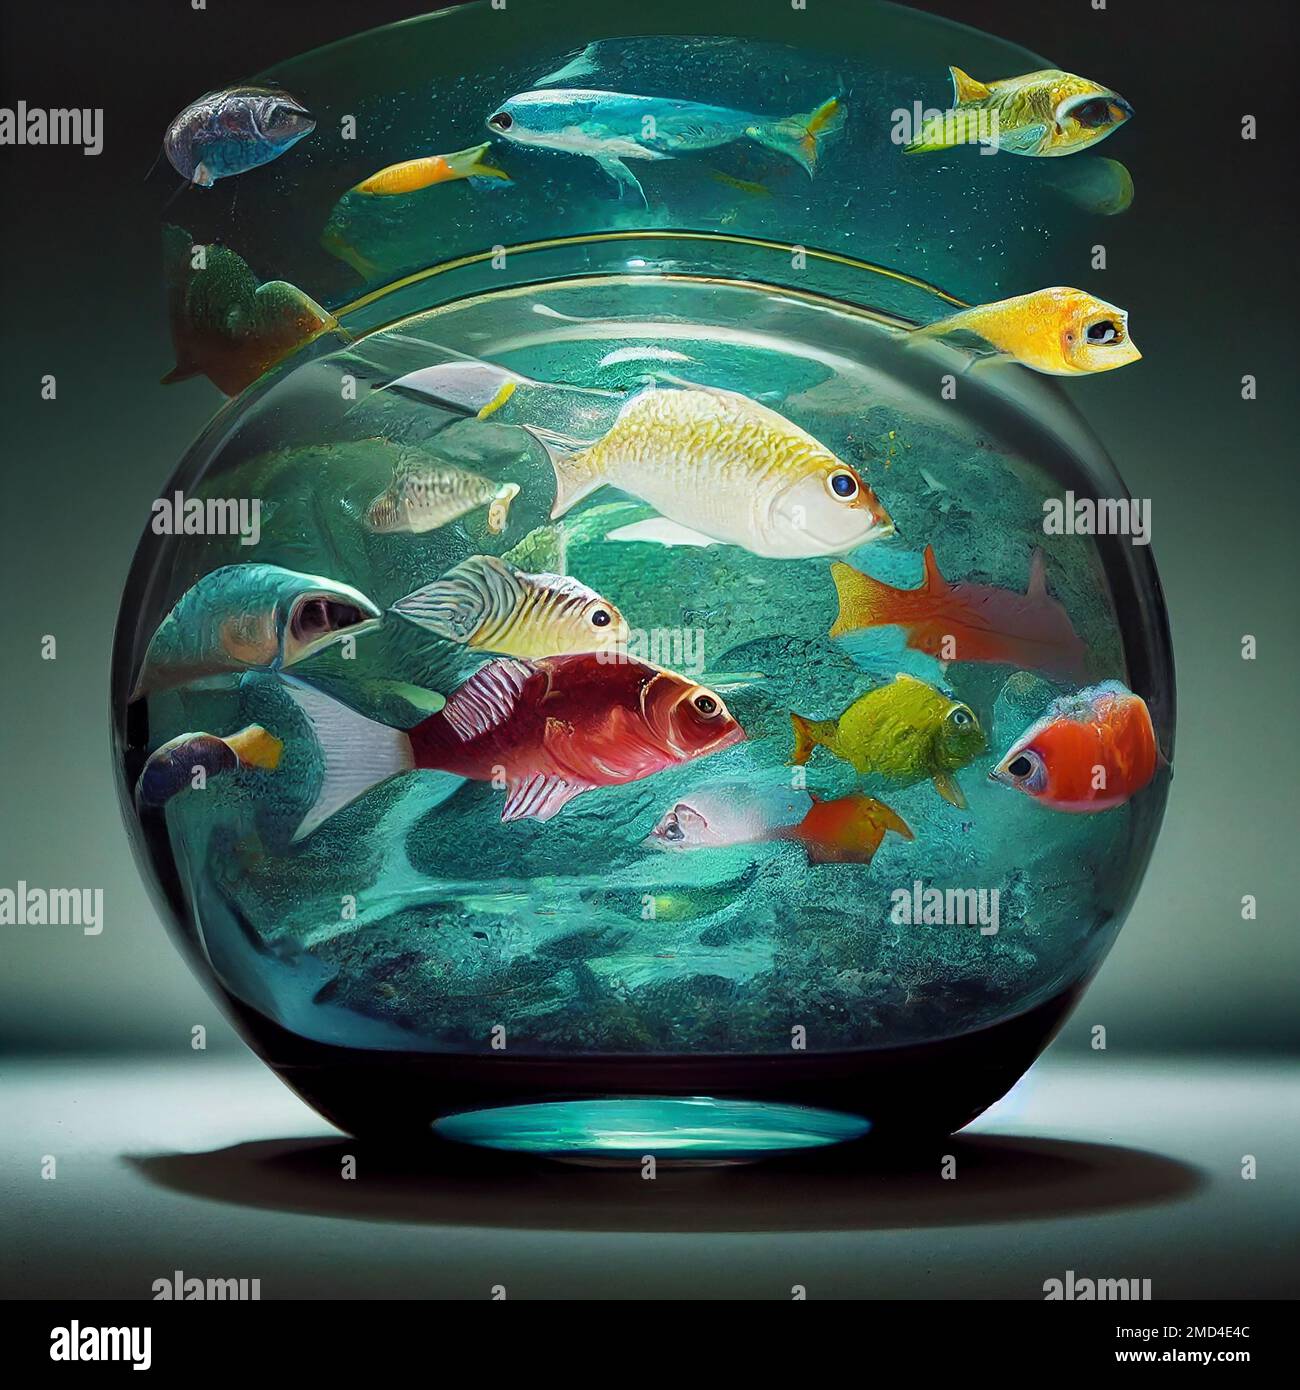 Universe on a fishbowl Stock Photo